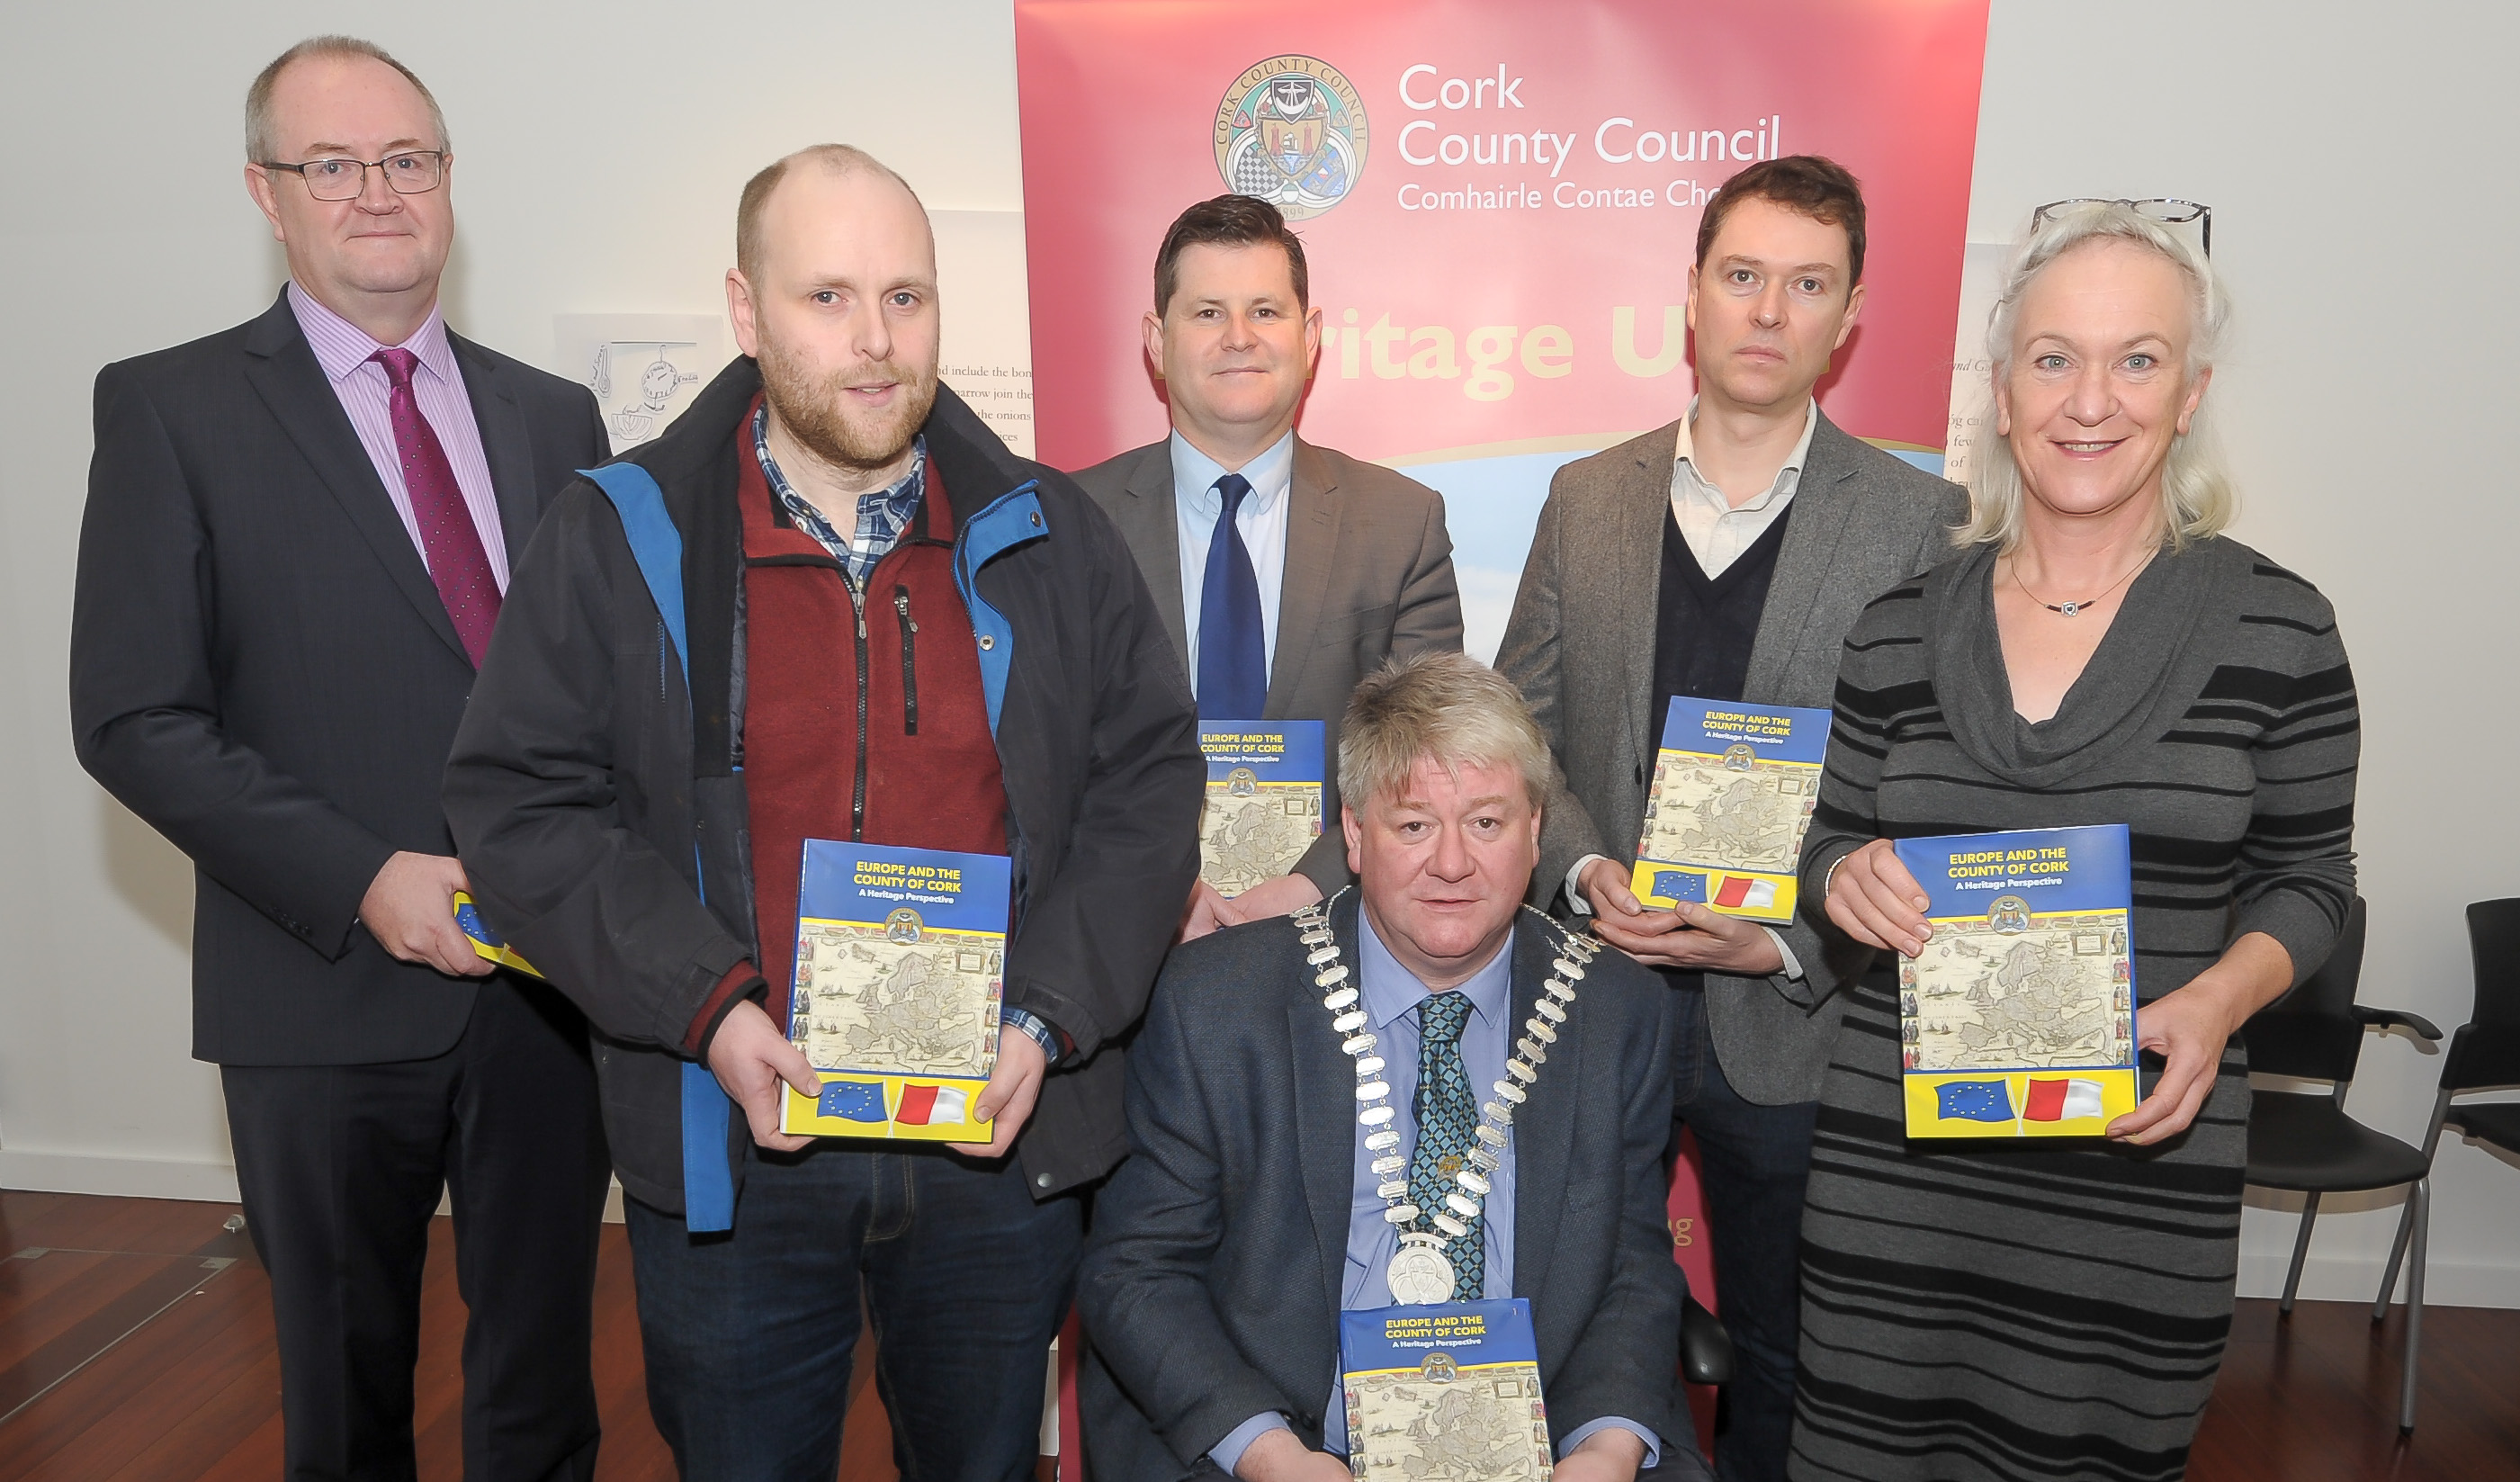 Launch of New Publication by Cork County Council:  ‘EUROPE AND THE COUNTY OF CORK: A HERITAGE PERSPECTIVE’